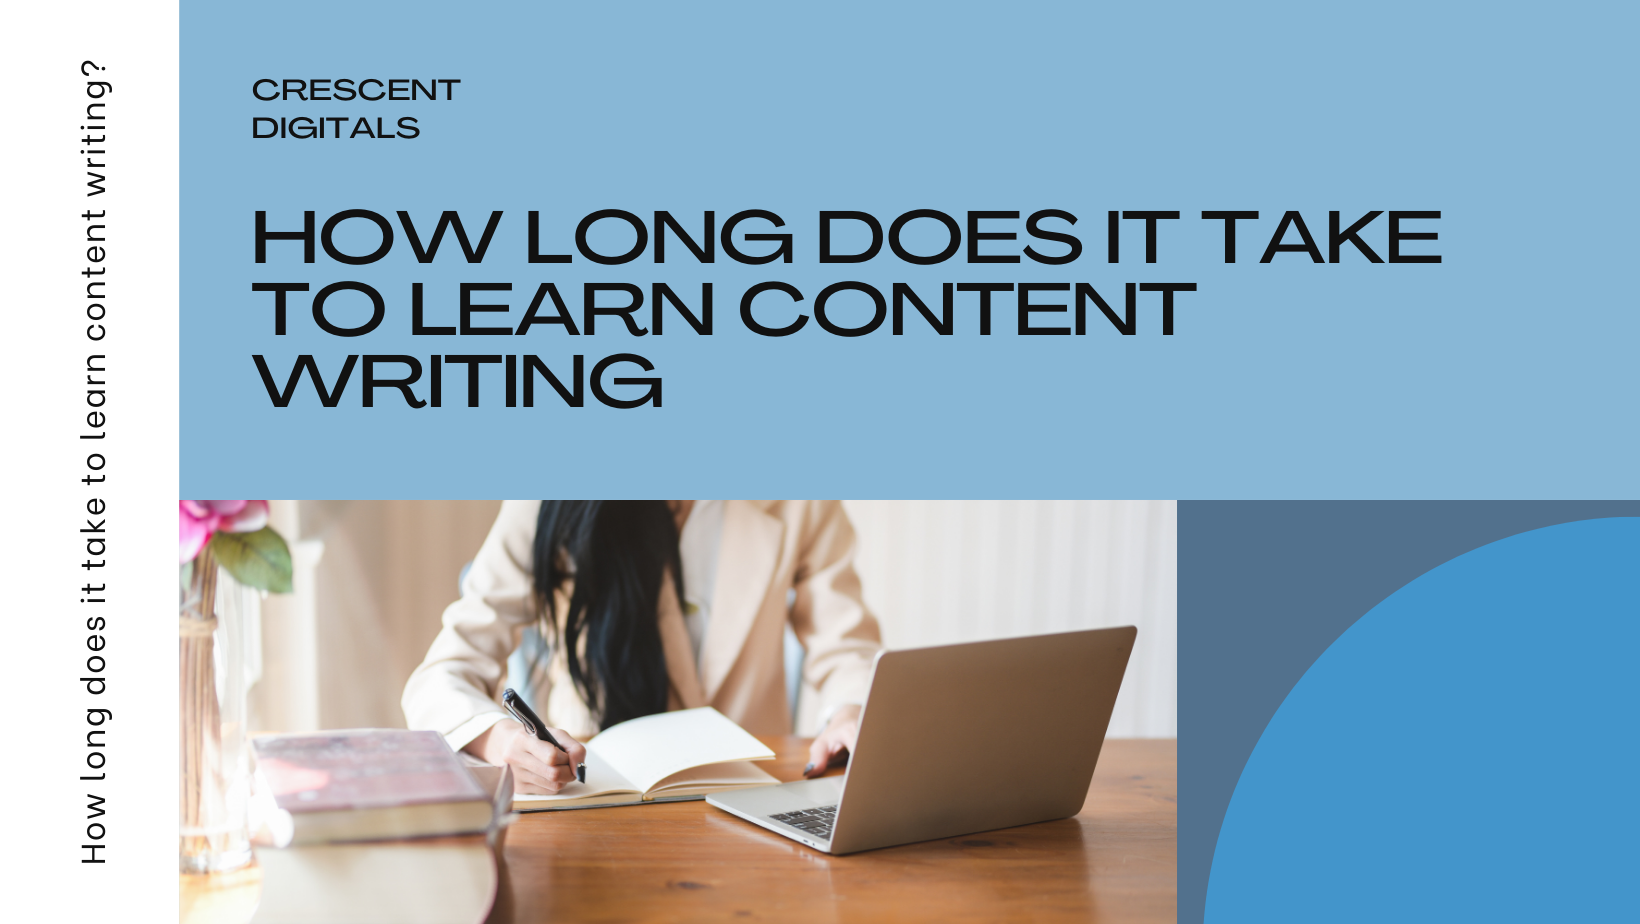 How Long Does It Take to Learn Content Writing